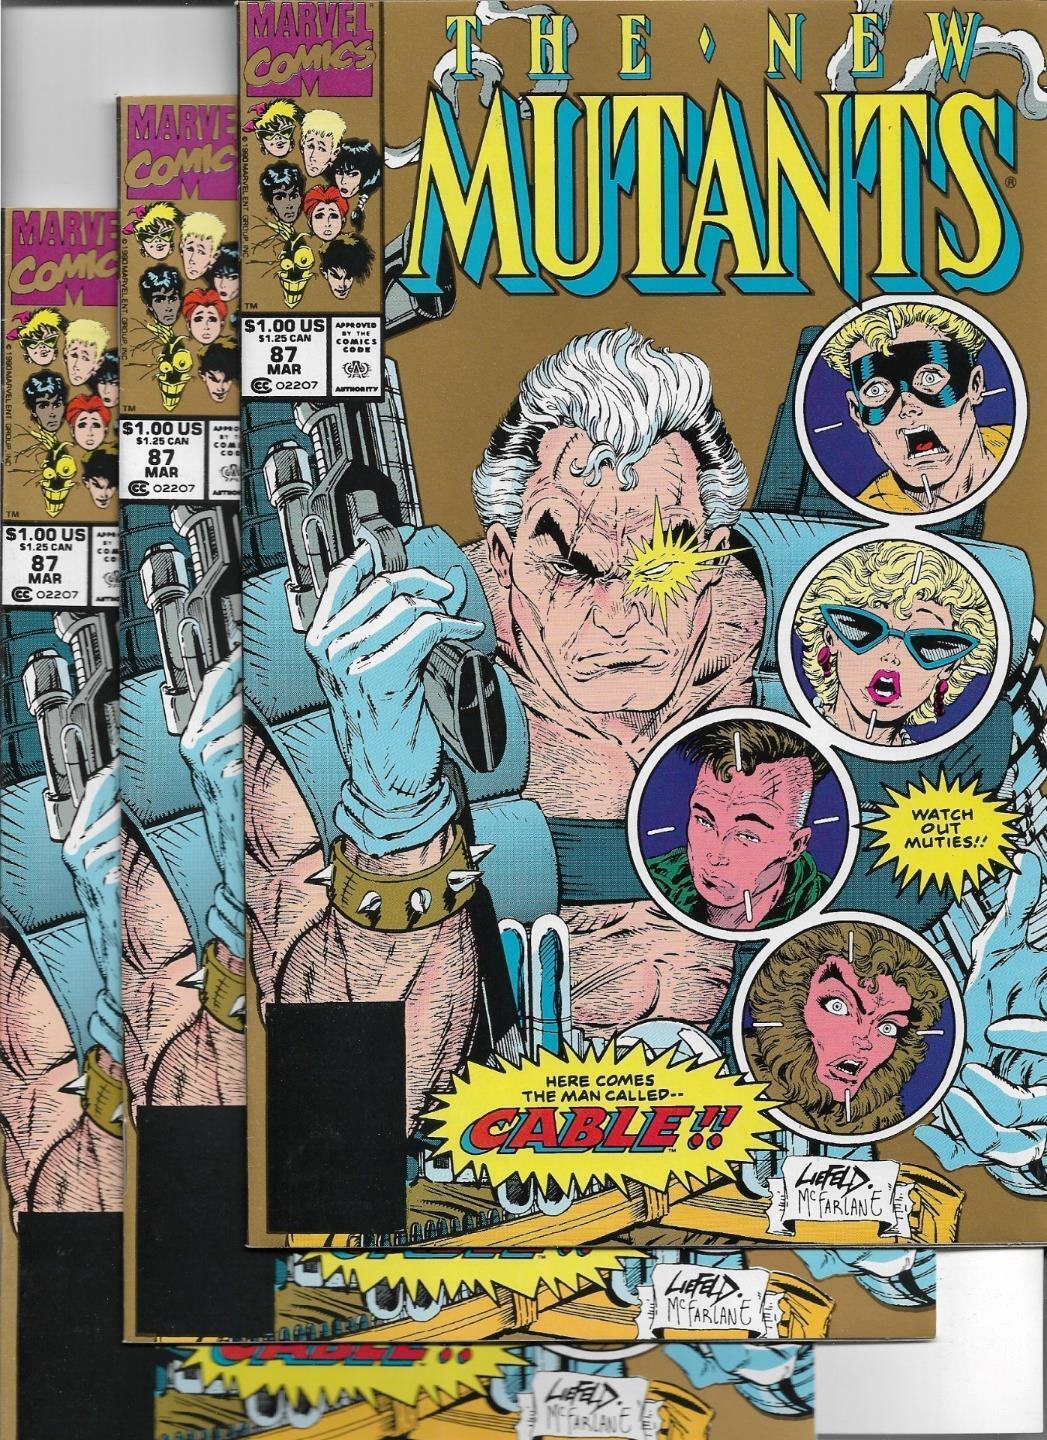 THE NEW MUTANTS #87 1990 NEAR MINT- 9.2 4790 CABLE three issues 2nd print